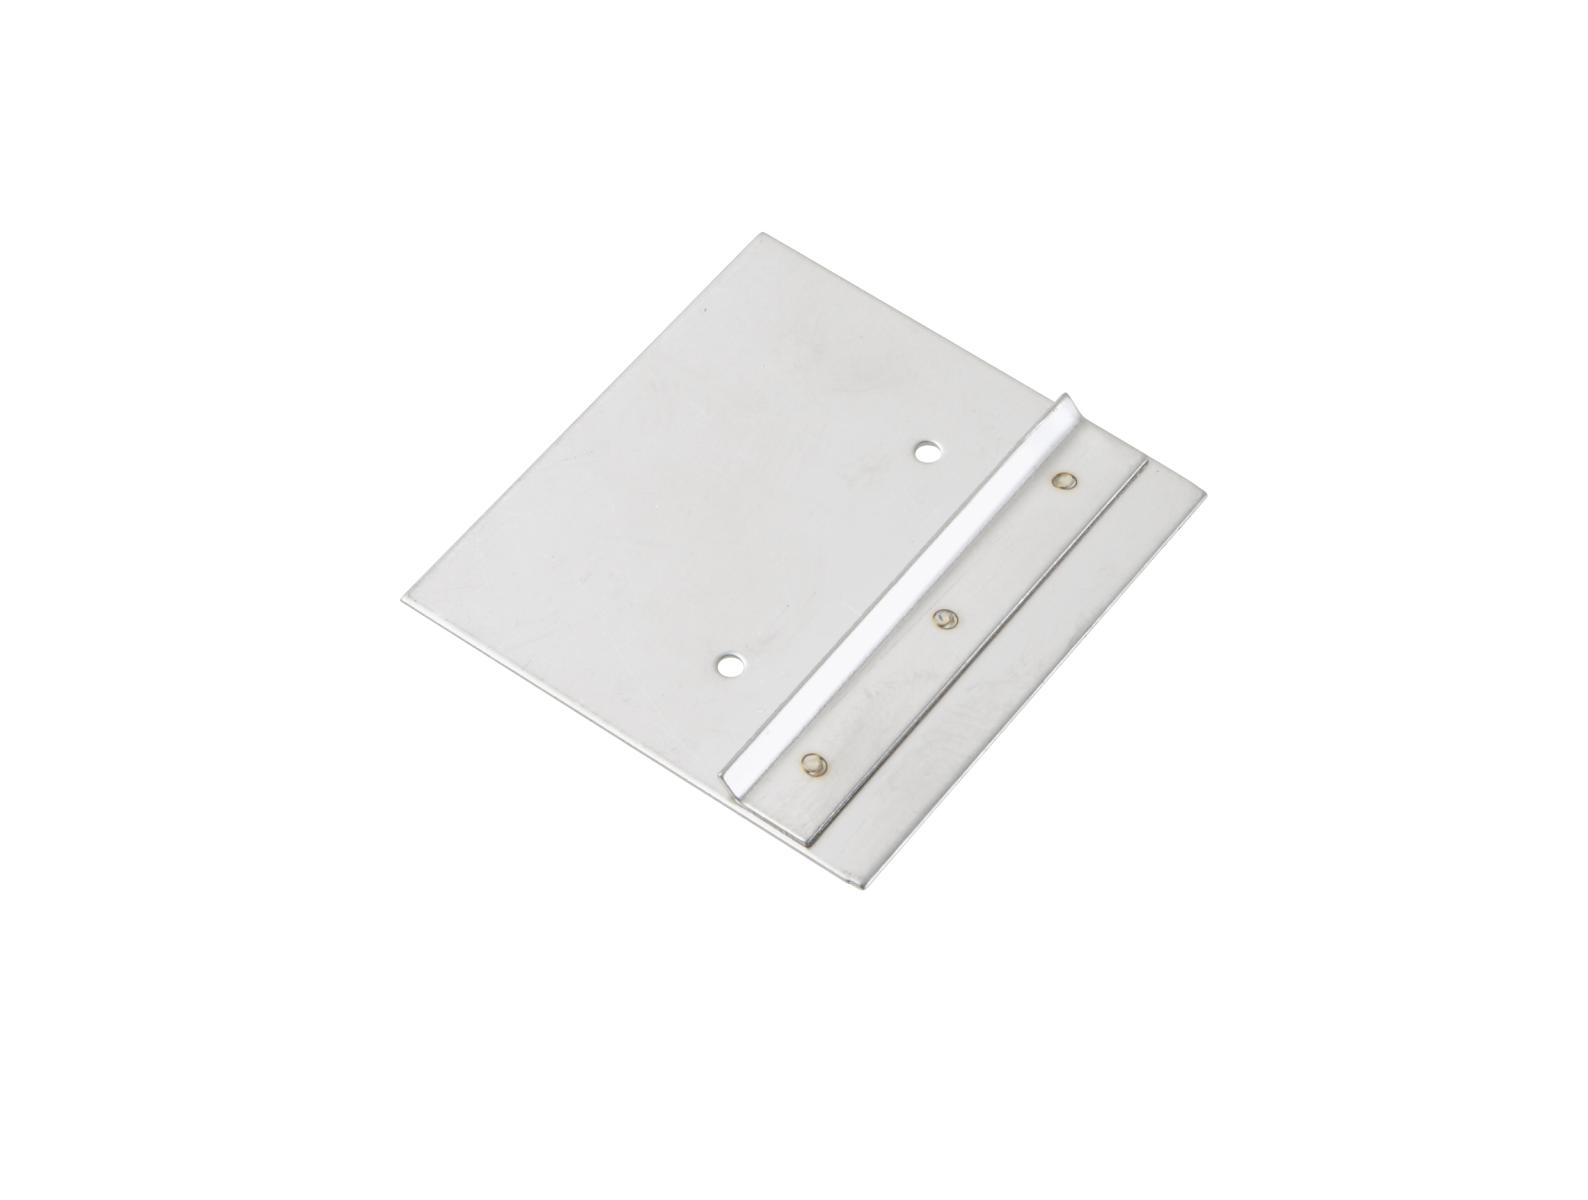 TapeTech® Baffle Plate Assembly. Part number 054048F